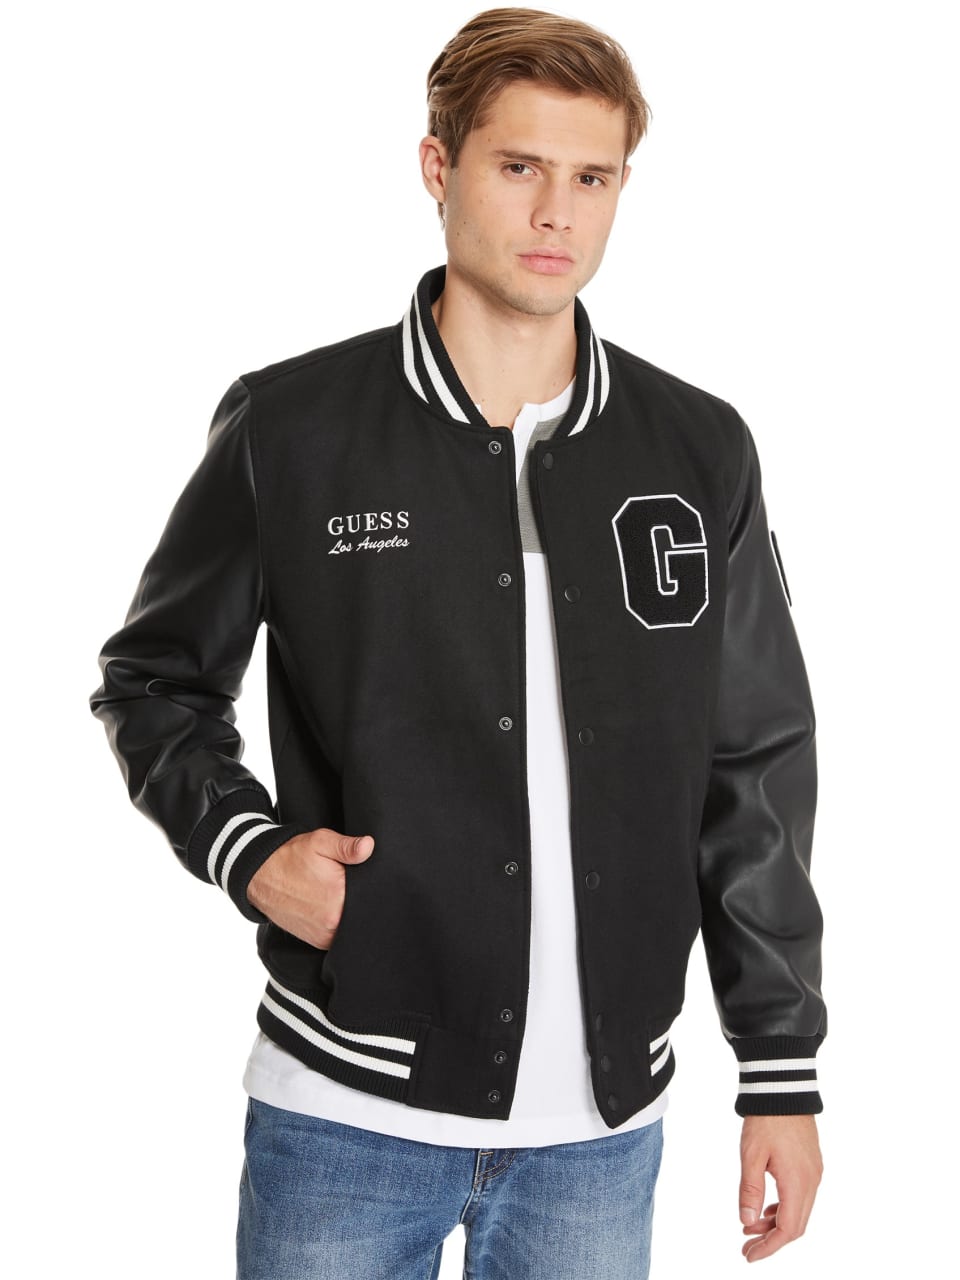 GUESS Factory Men's Kenny Logo Varsity Jacket With Removable Hood | eBay